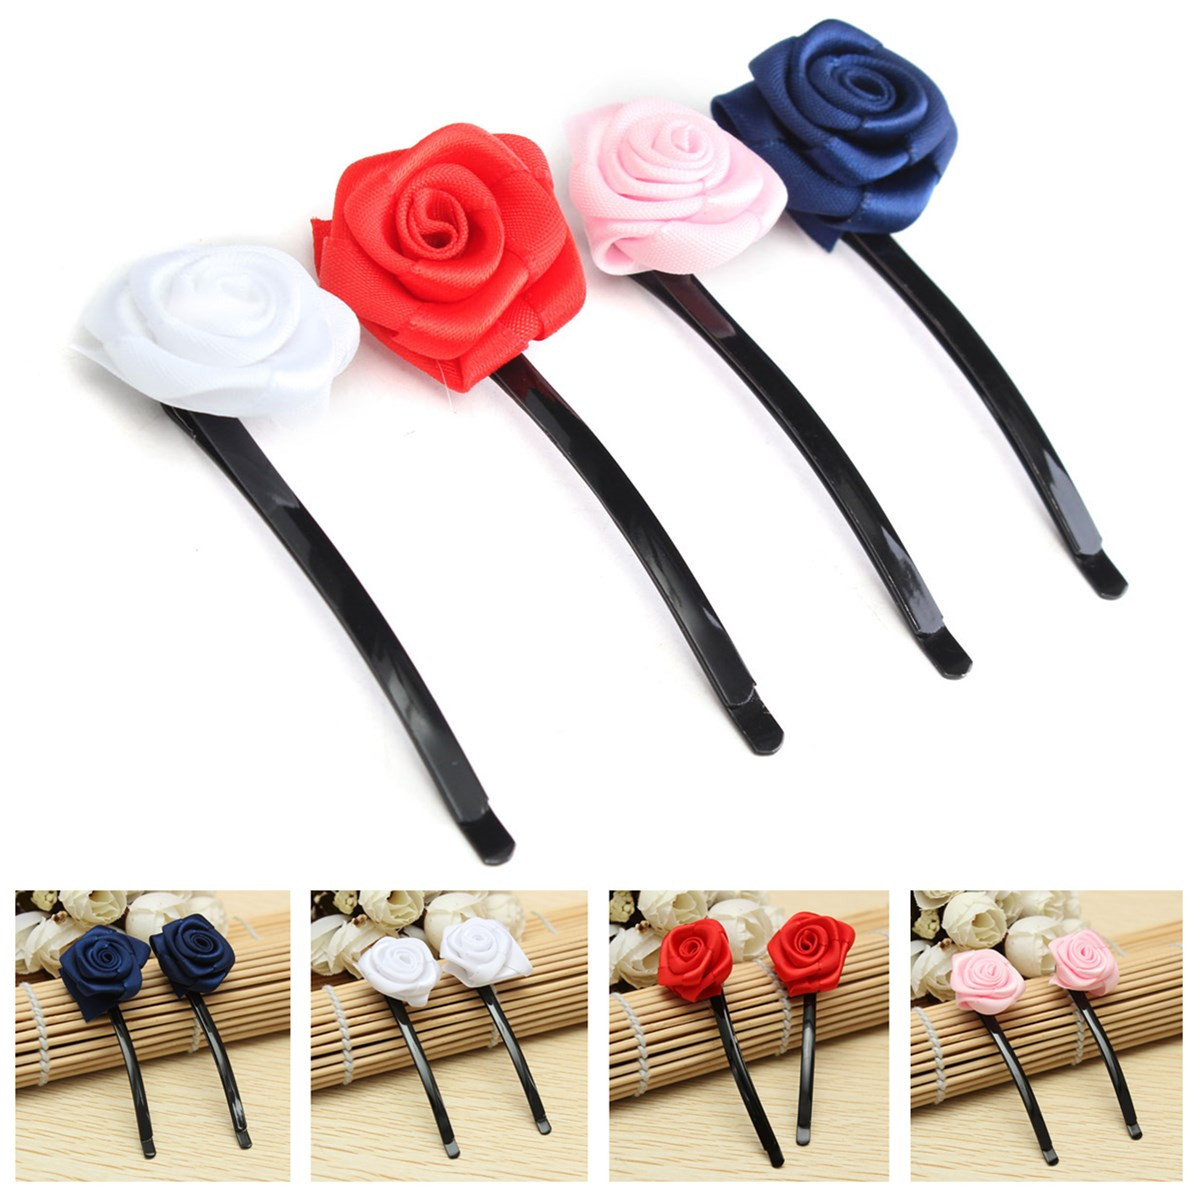 6pcs-Rose-Flowers-Hair-Pins-Grips-Clips-Accessories-for-Wedding-Party-1037583-2